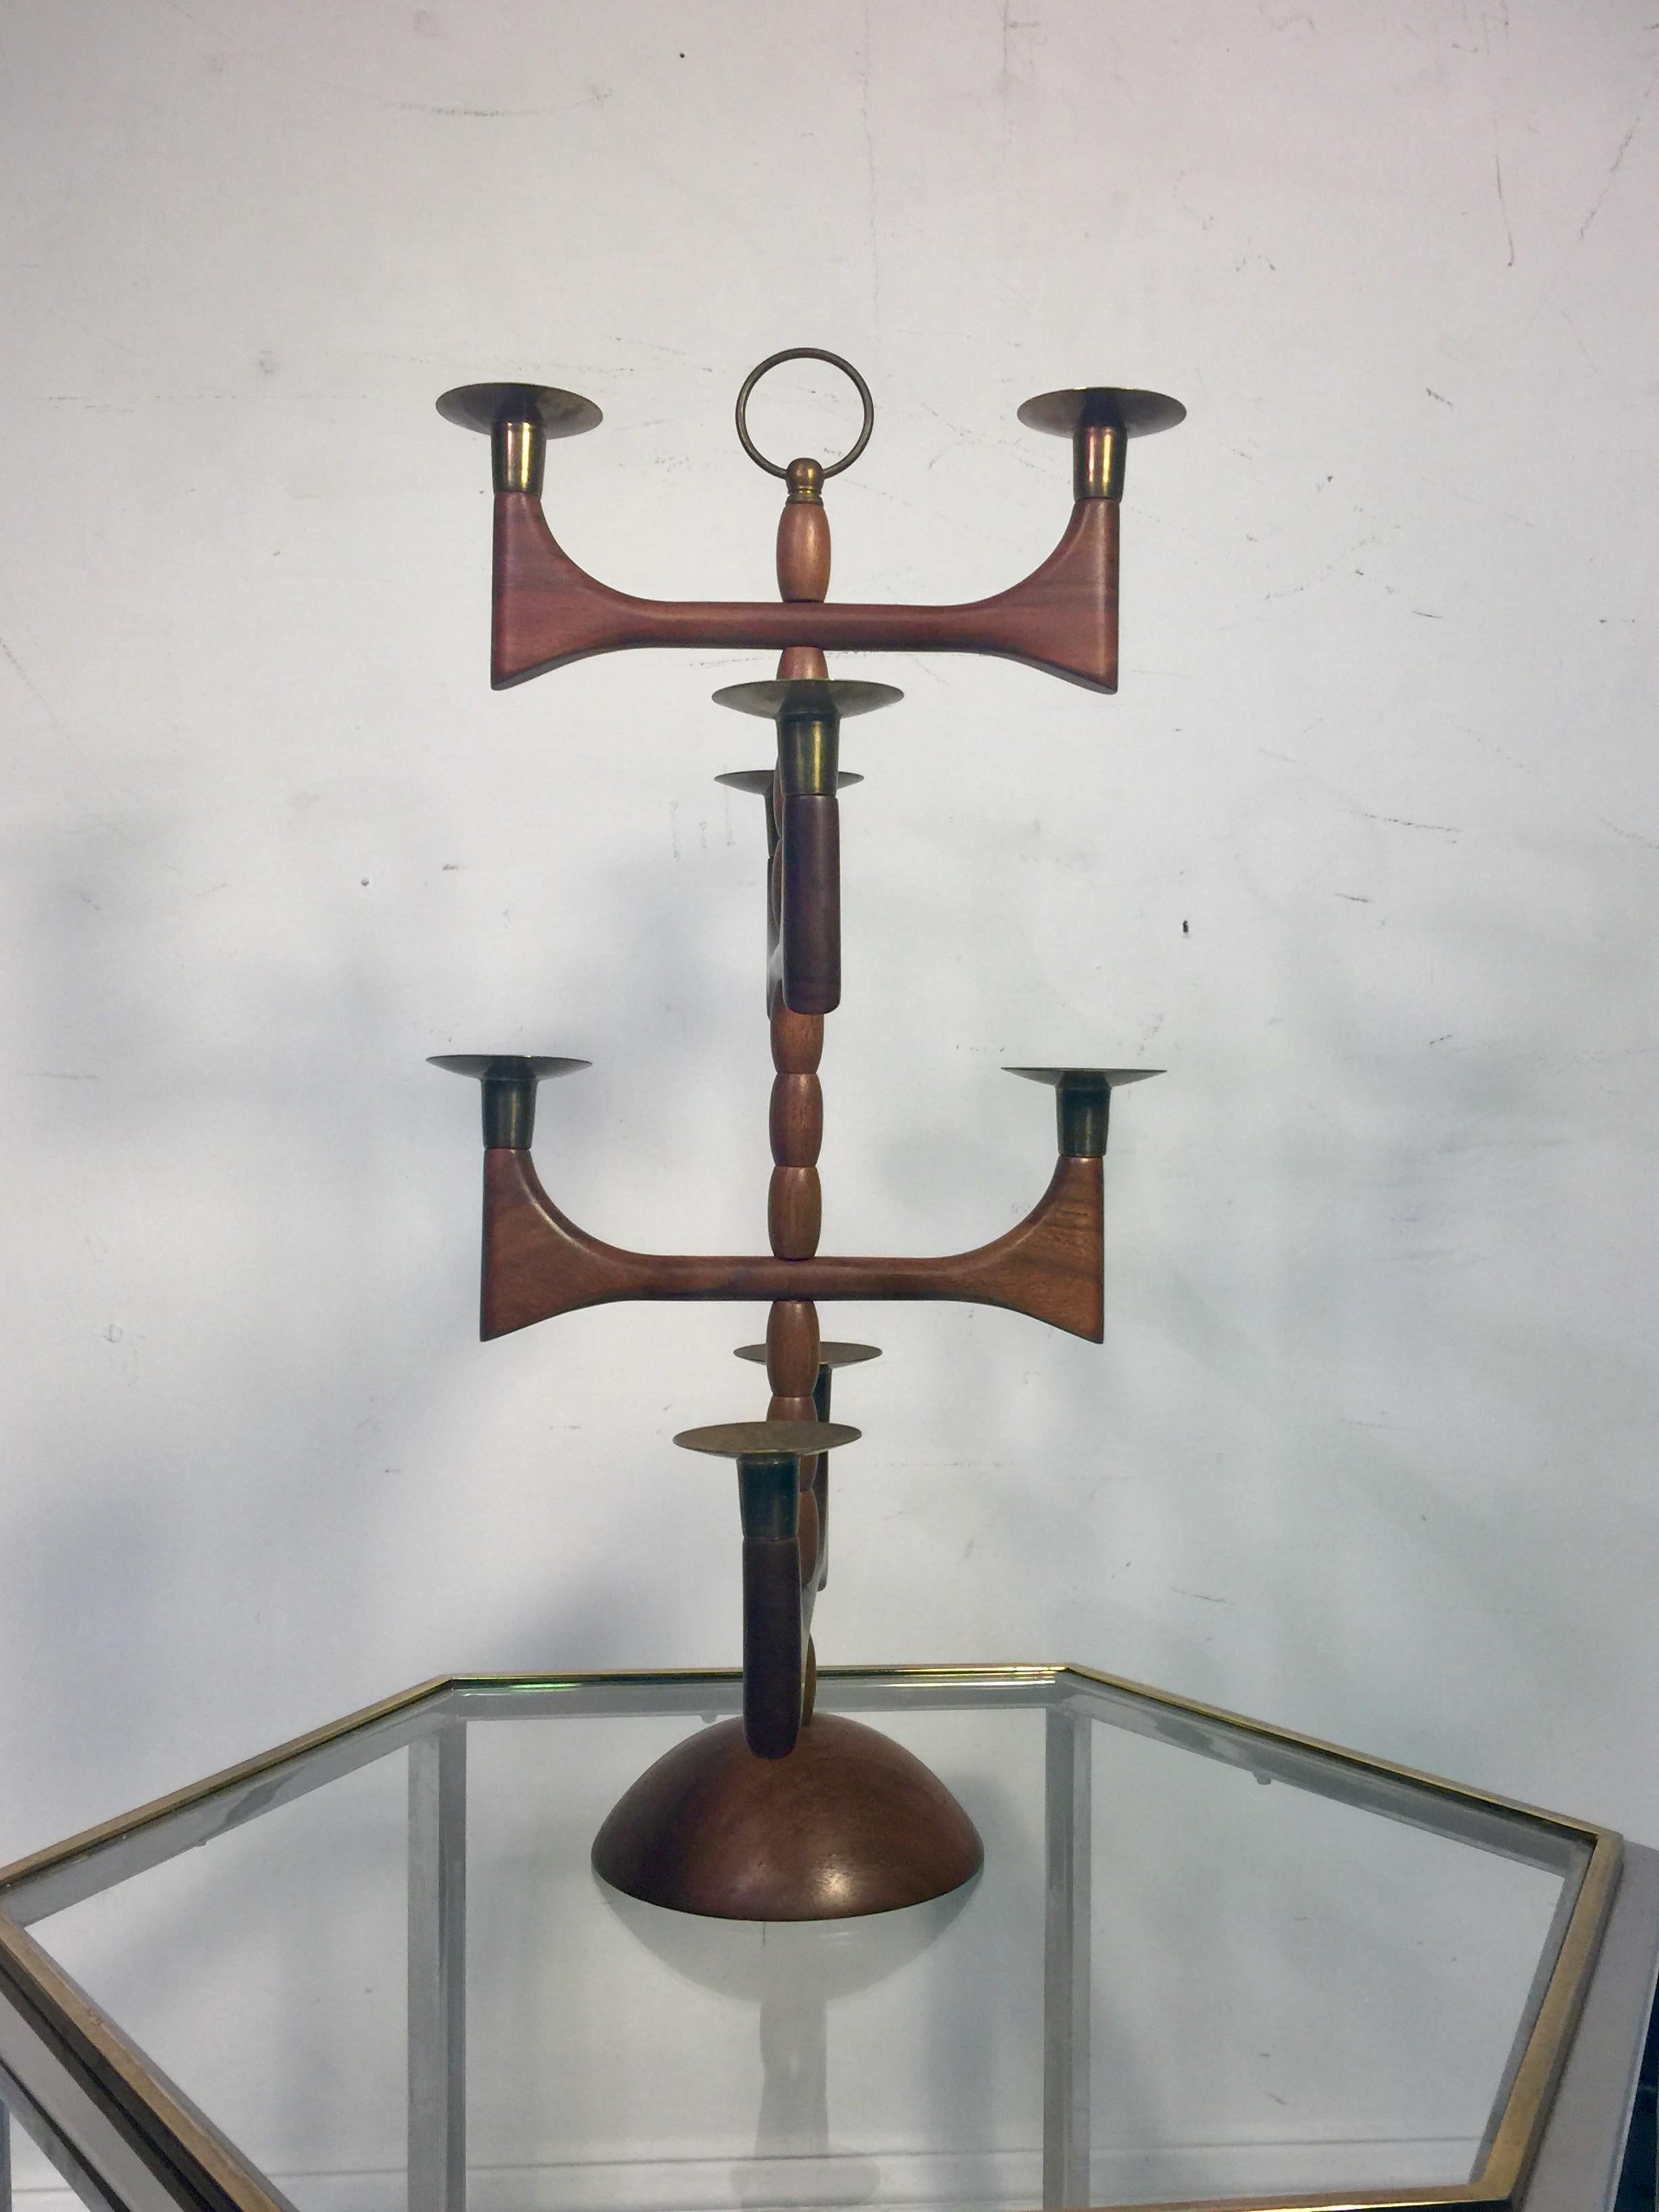 Midcentury Danish wood and brass candelabra with eight candleholders and brass ring finial that you can use for carrying the candelabra. Great design for a Mid-Century Modern dining table. The diameter of the base is 6 1/4